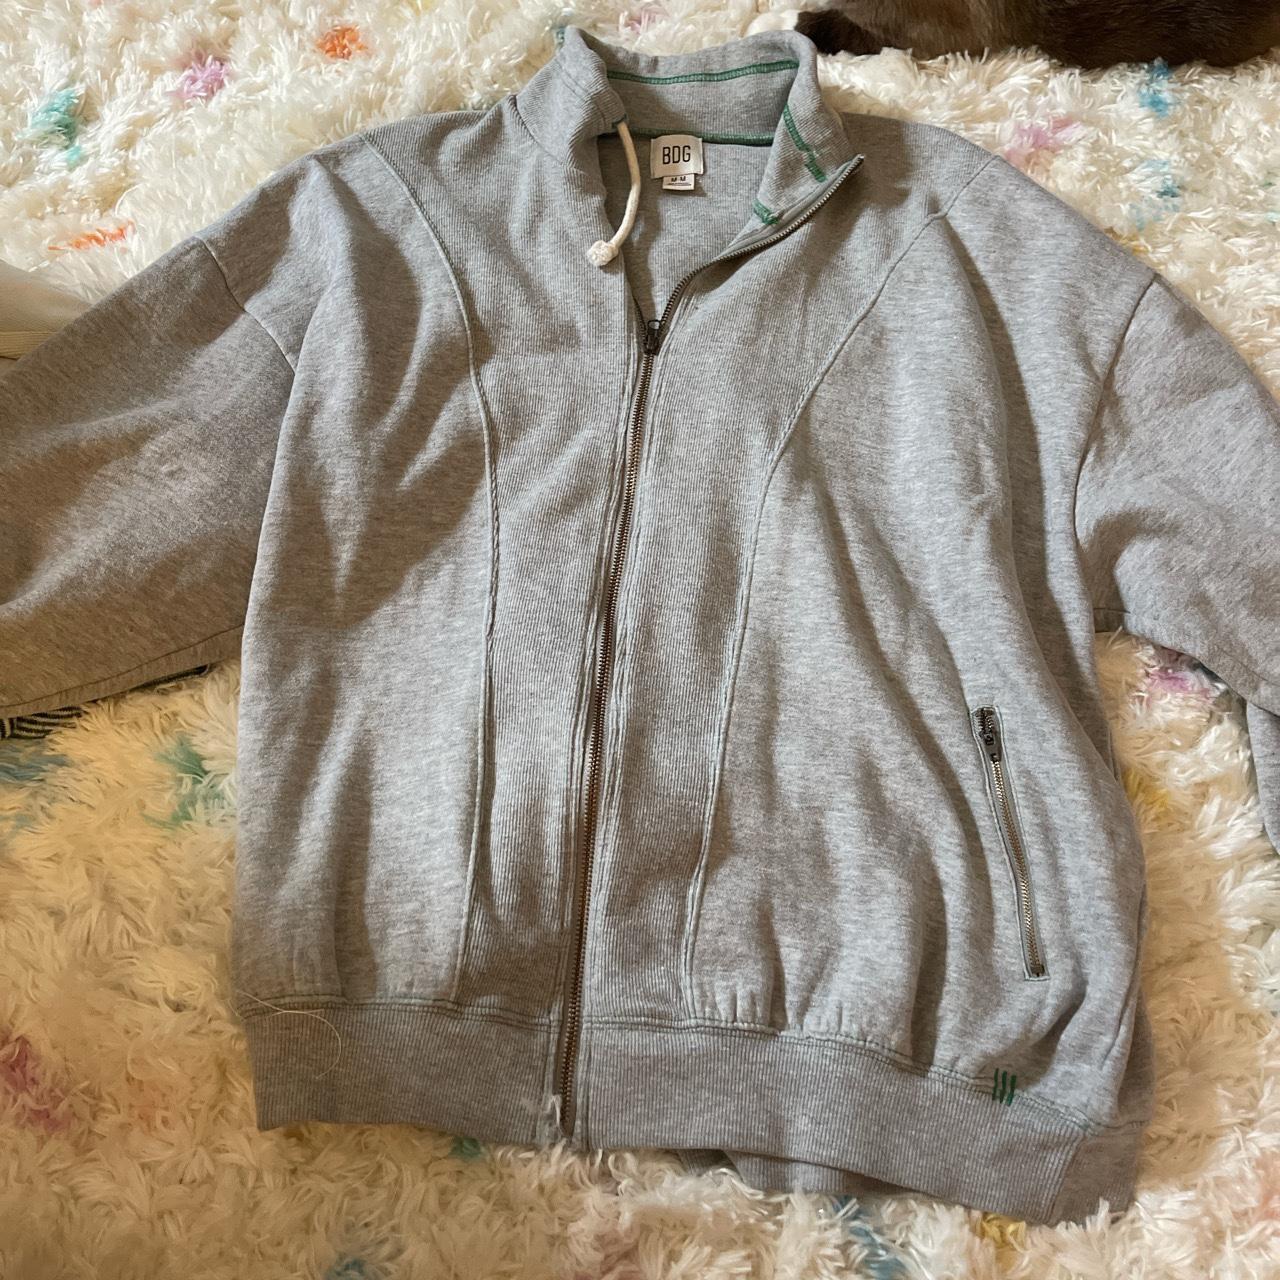 Urban outfitters BDG zip up, grey with green... - Depop